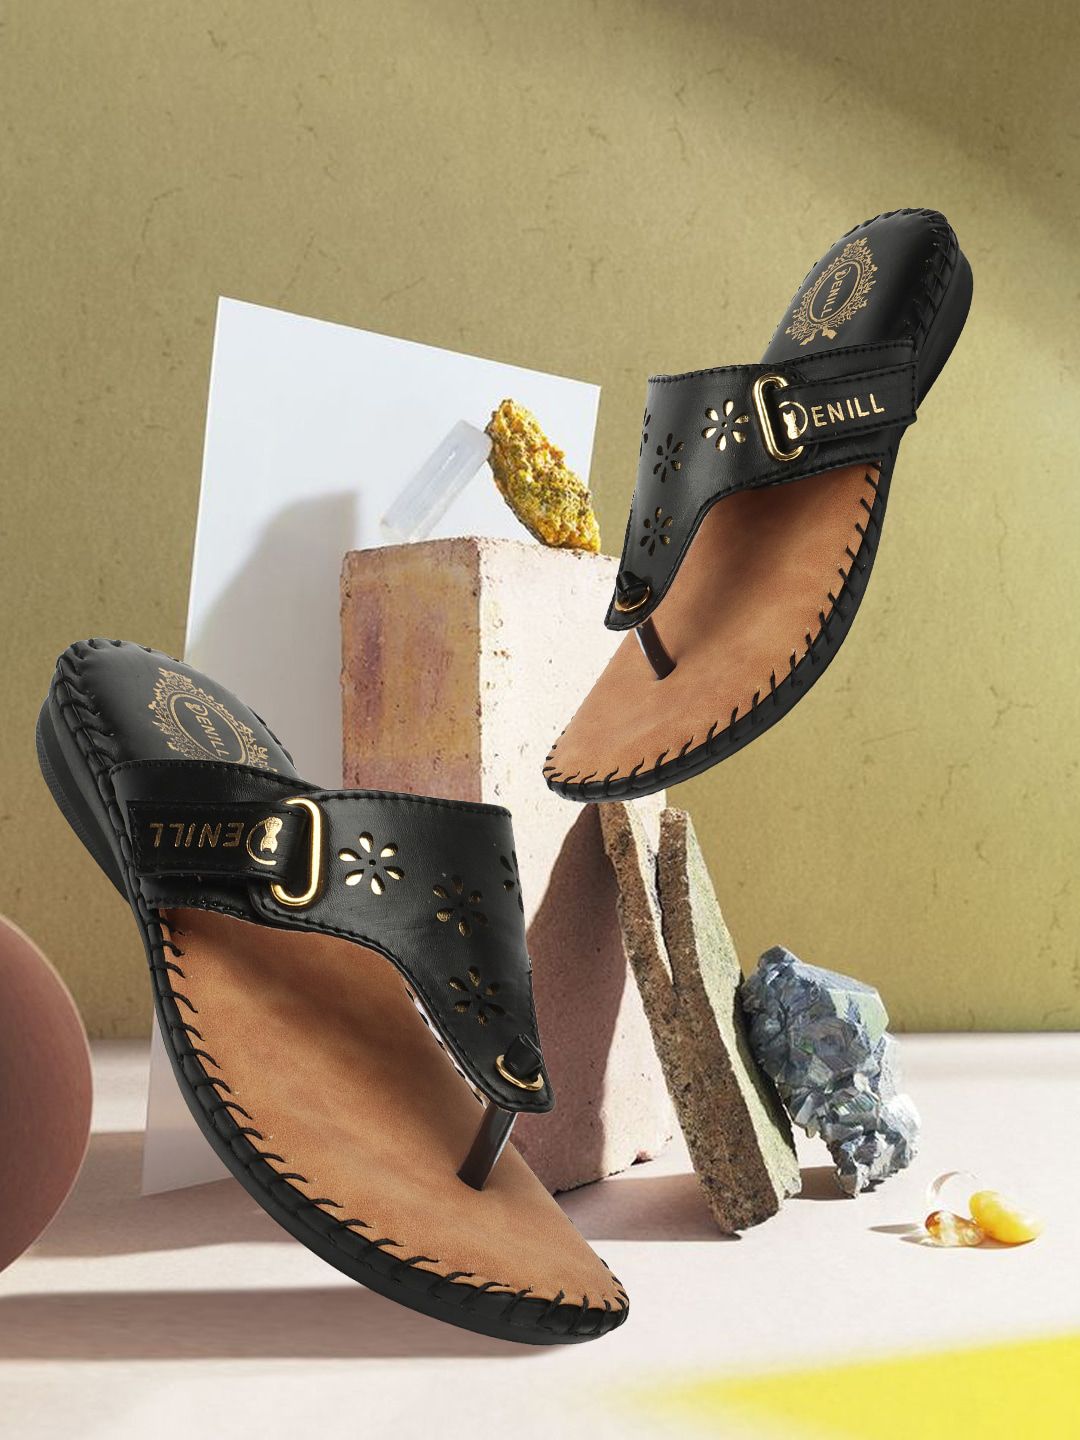 Denill Textured T-Strap Flats With Laser Cuts Price in India